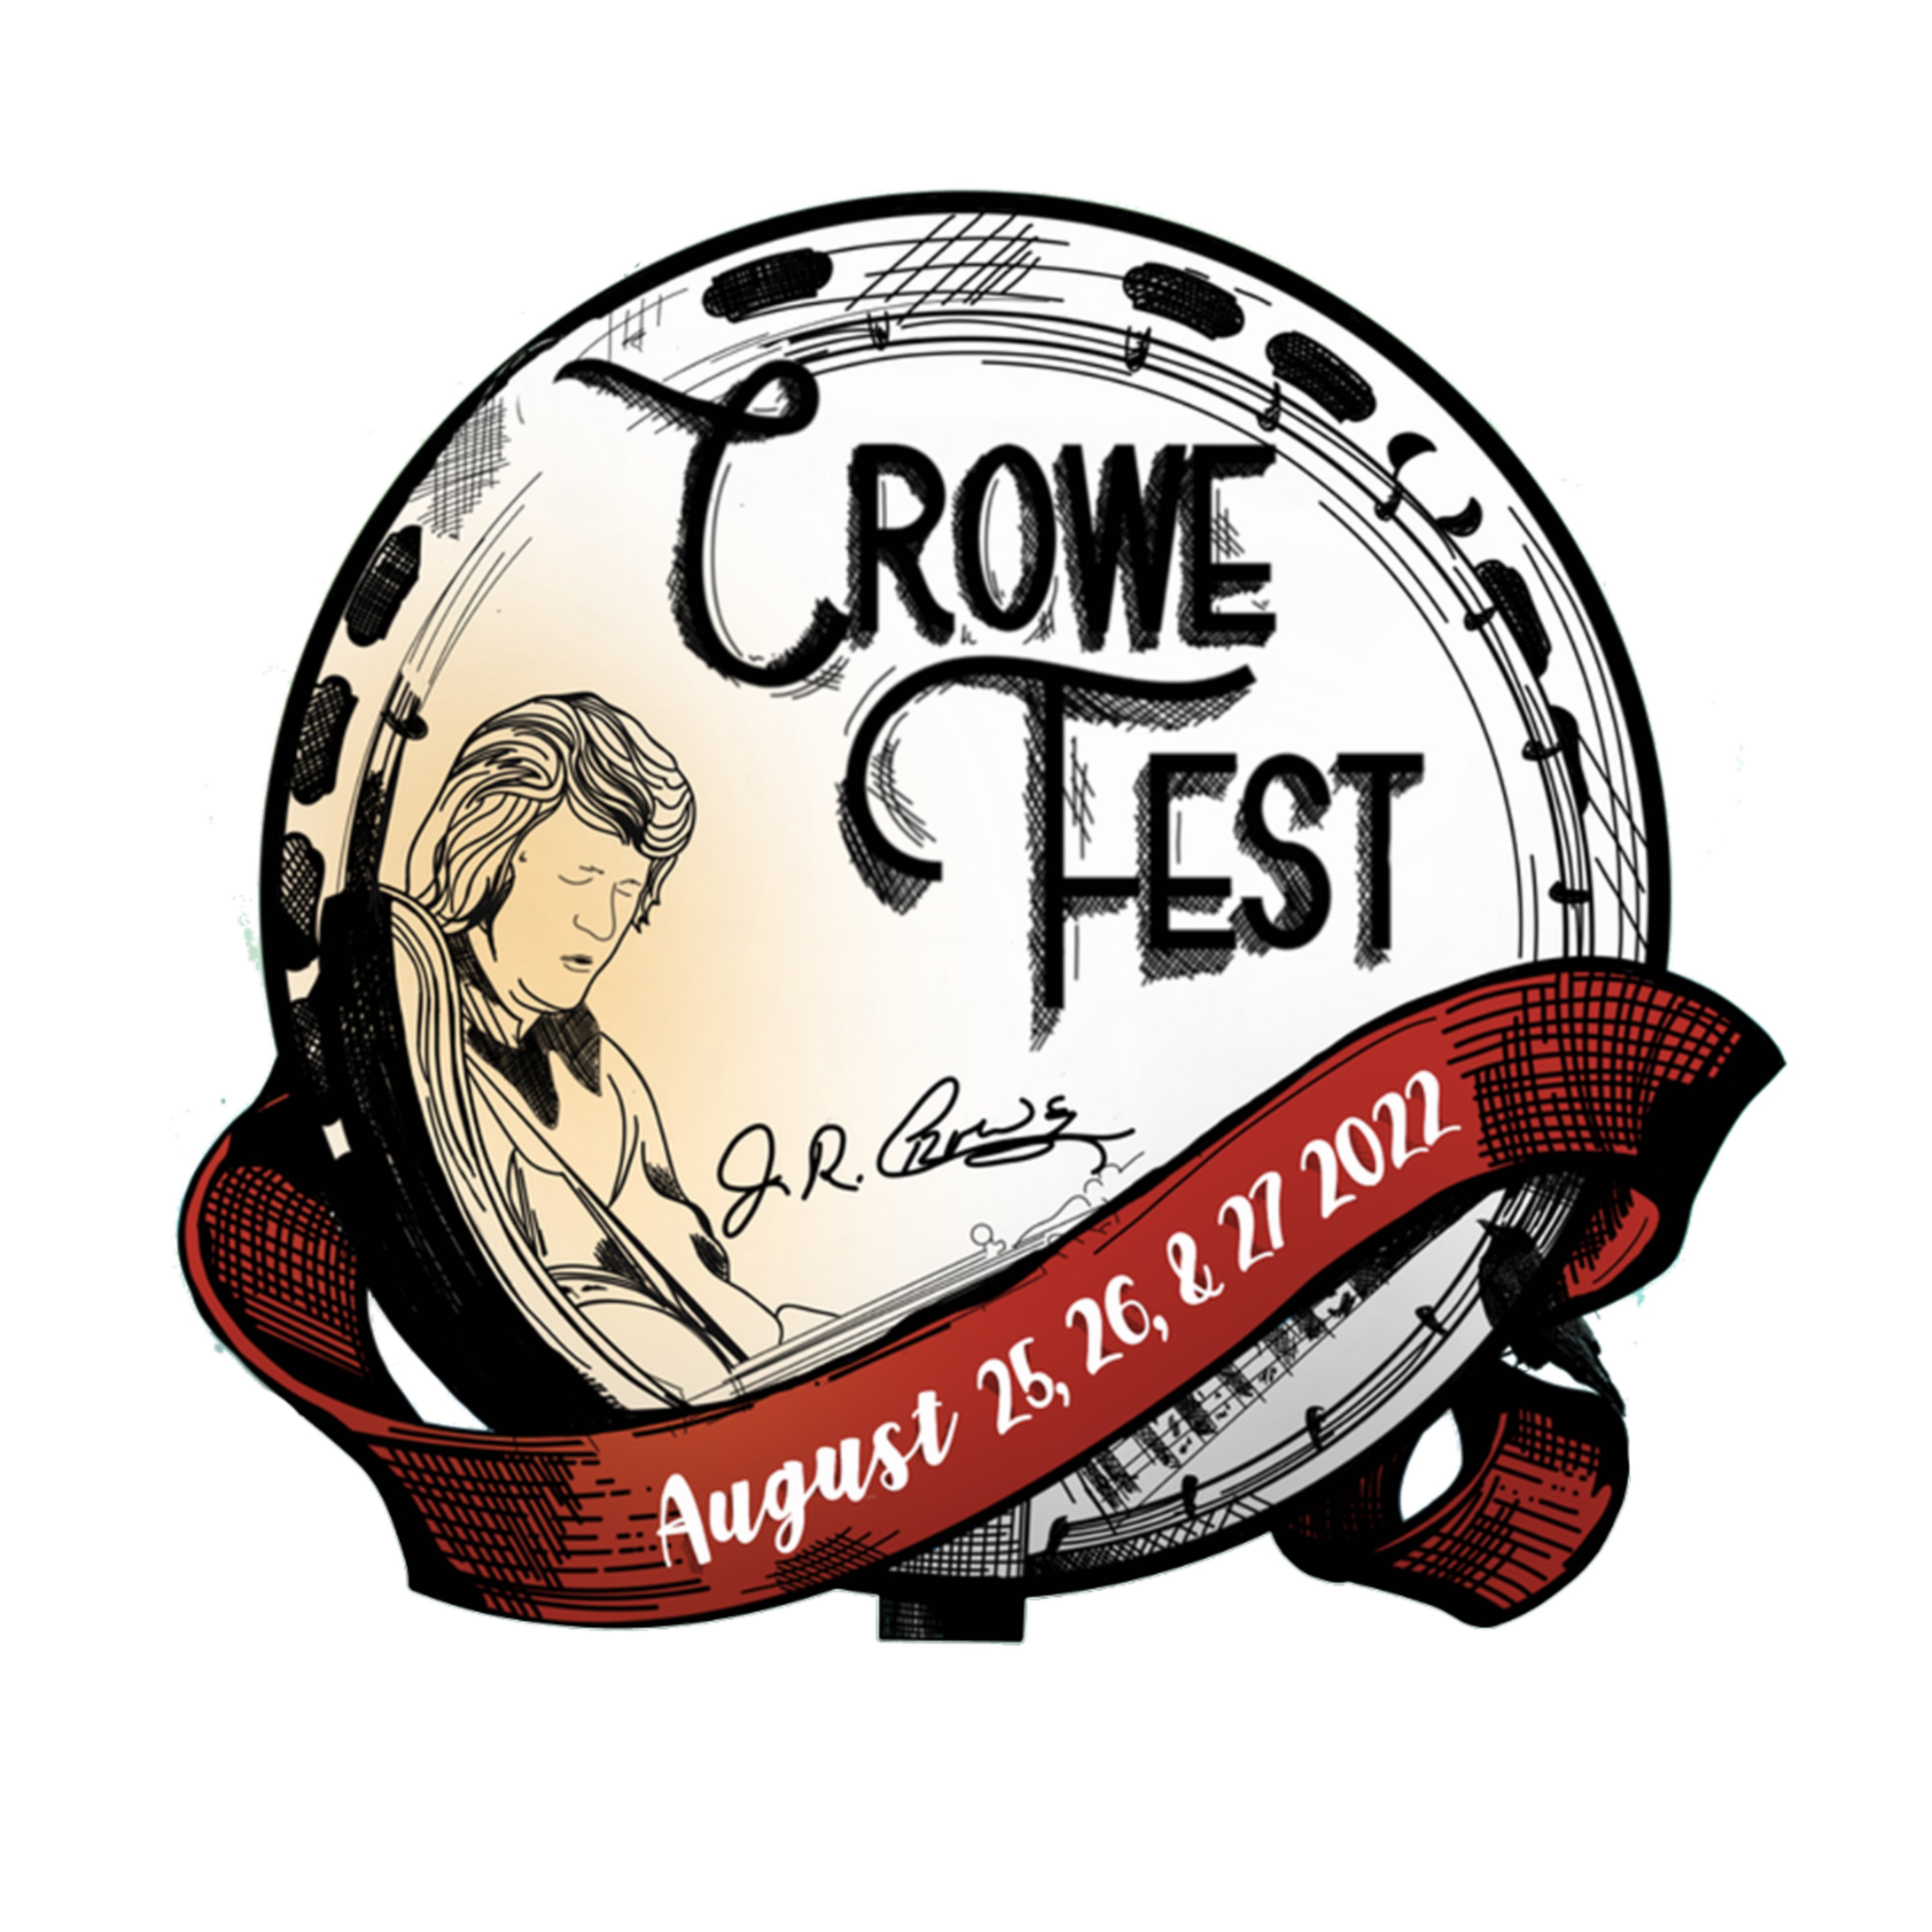 CROWE FEST Set For August 2527 In Clay City, Kentucky Celebration Of